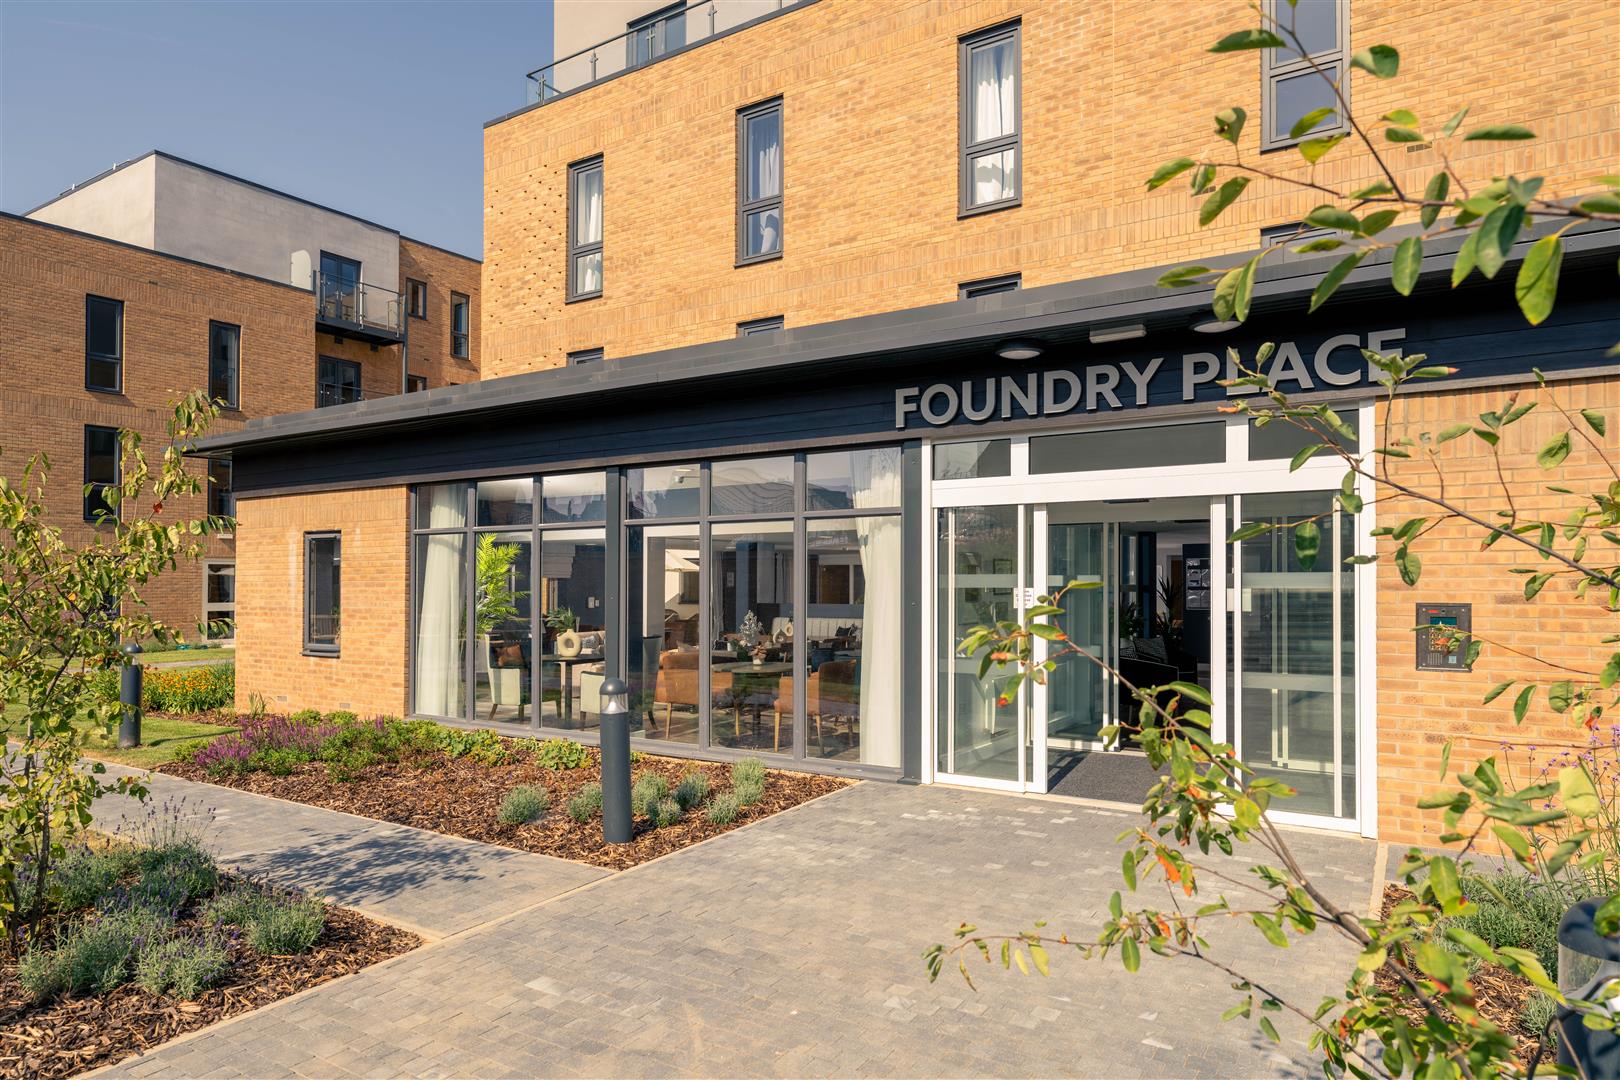 27 Foundry Place, Off the Gosford Road, Beccles